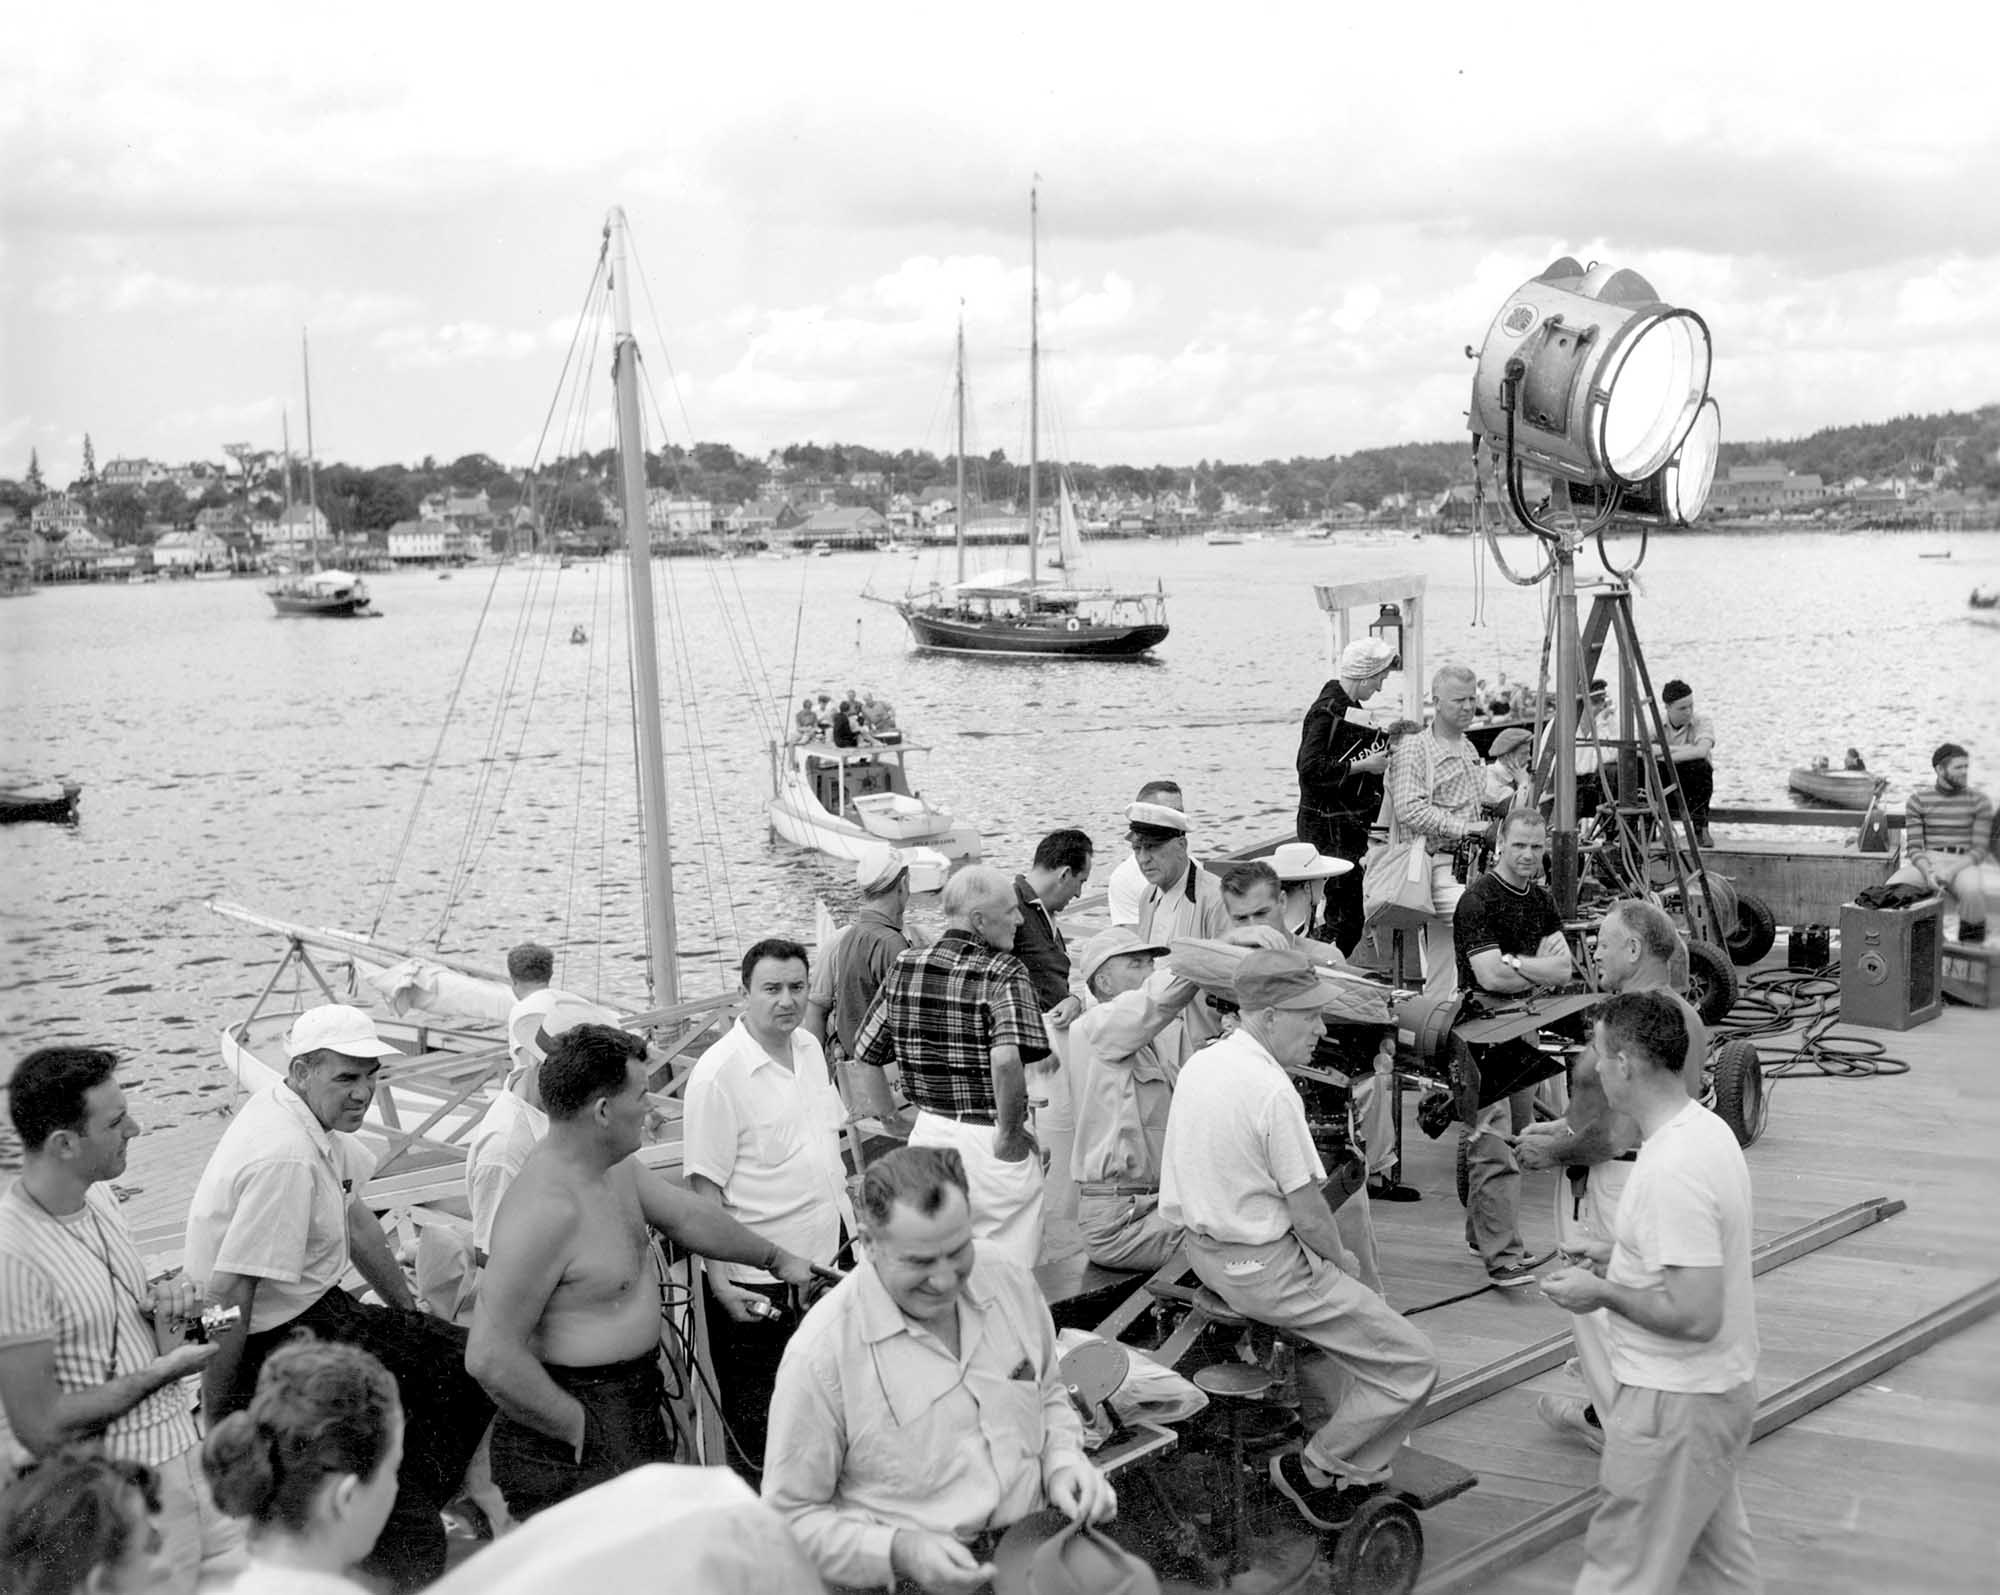 A photo from the 1956 film production of Carousel.